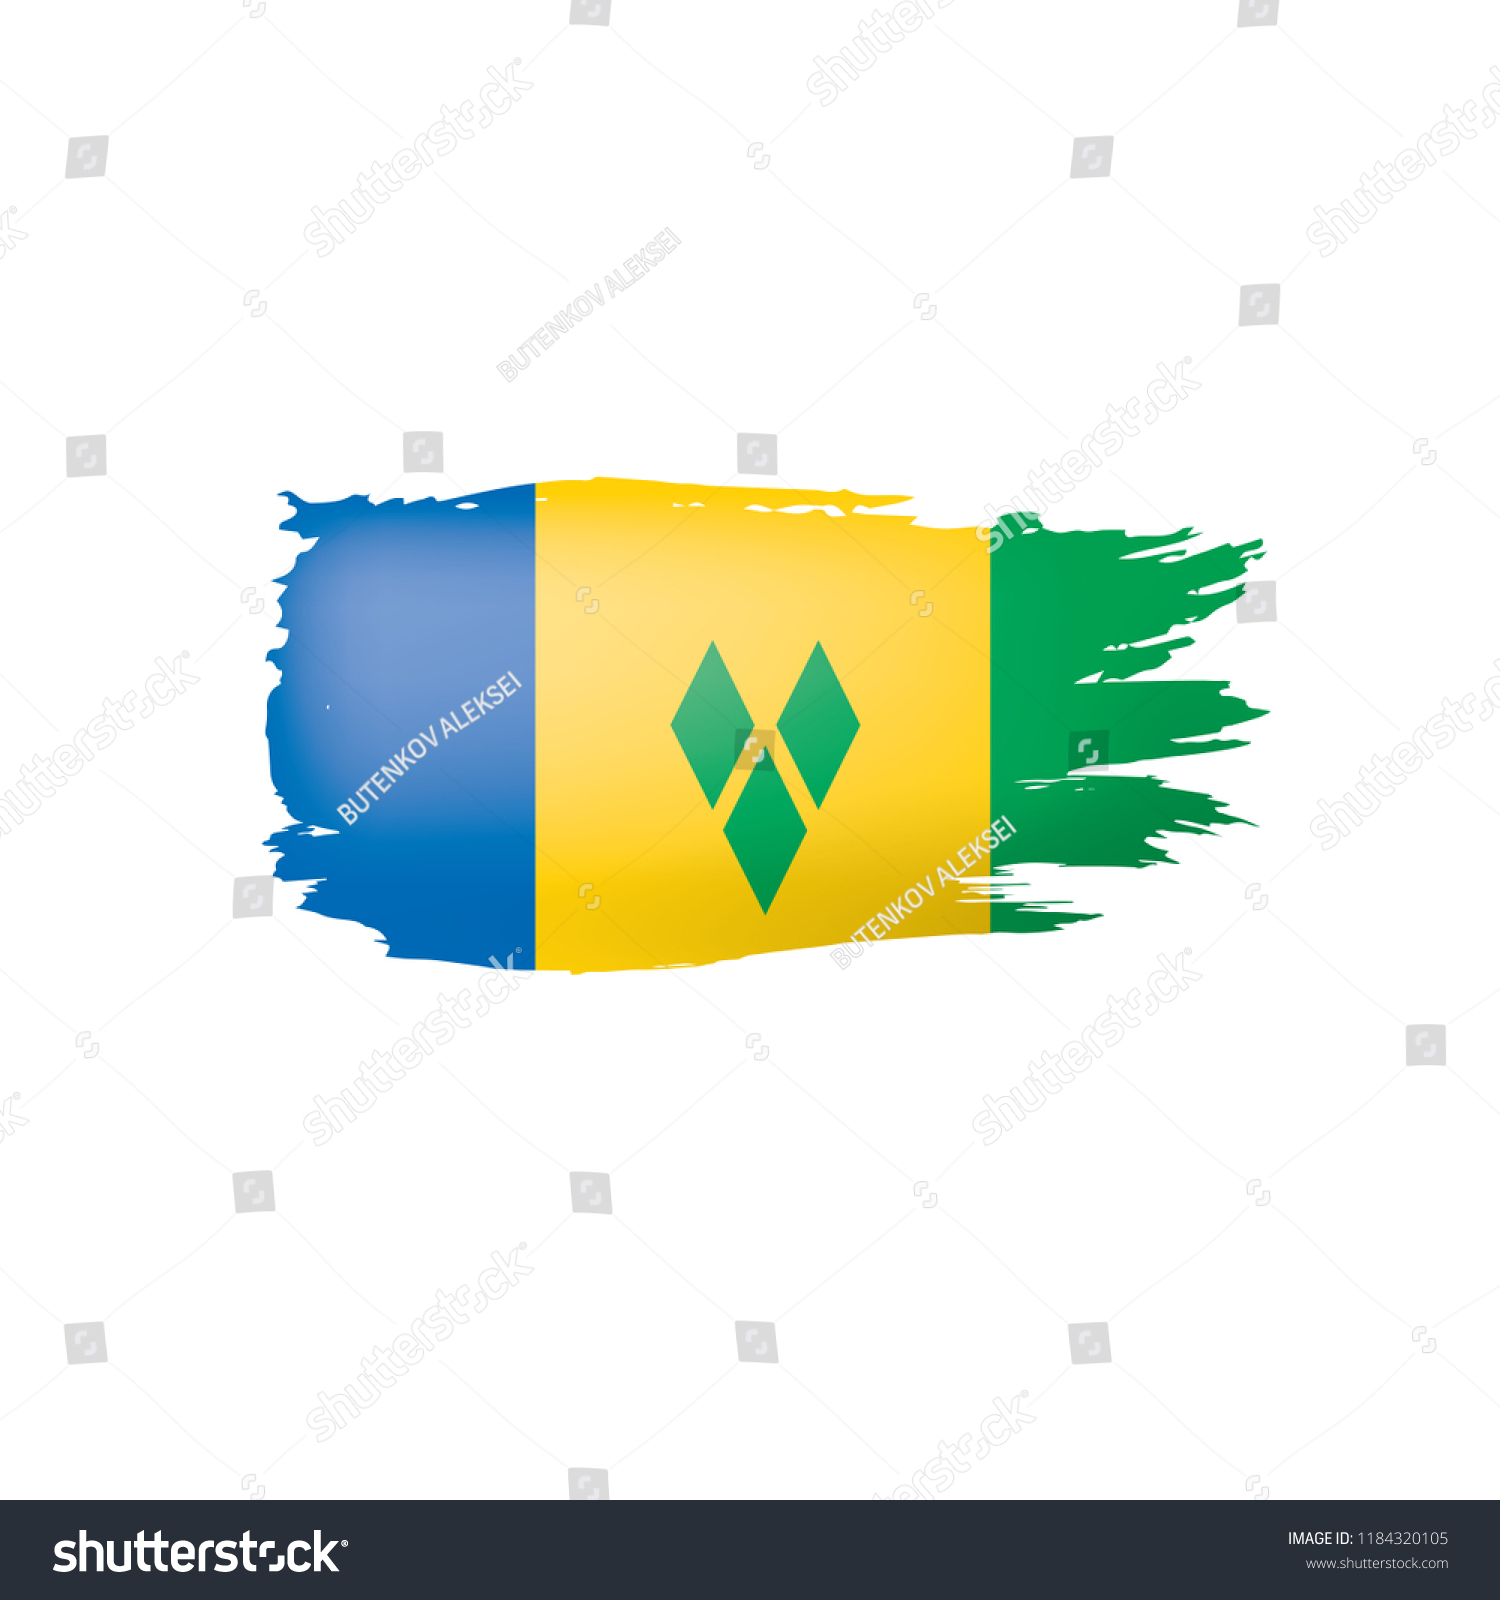 Saint Vincent and the Grenadines flag, vector - Royalty Free Stock ...